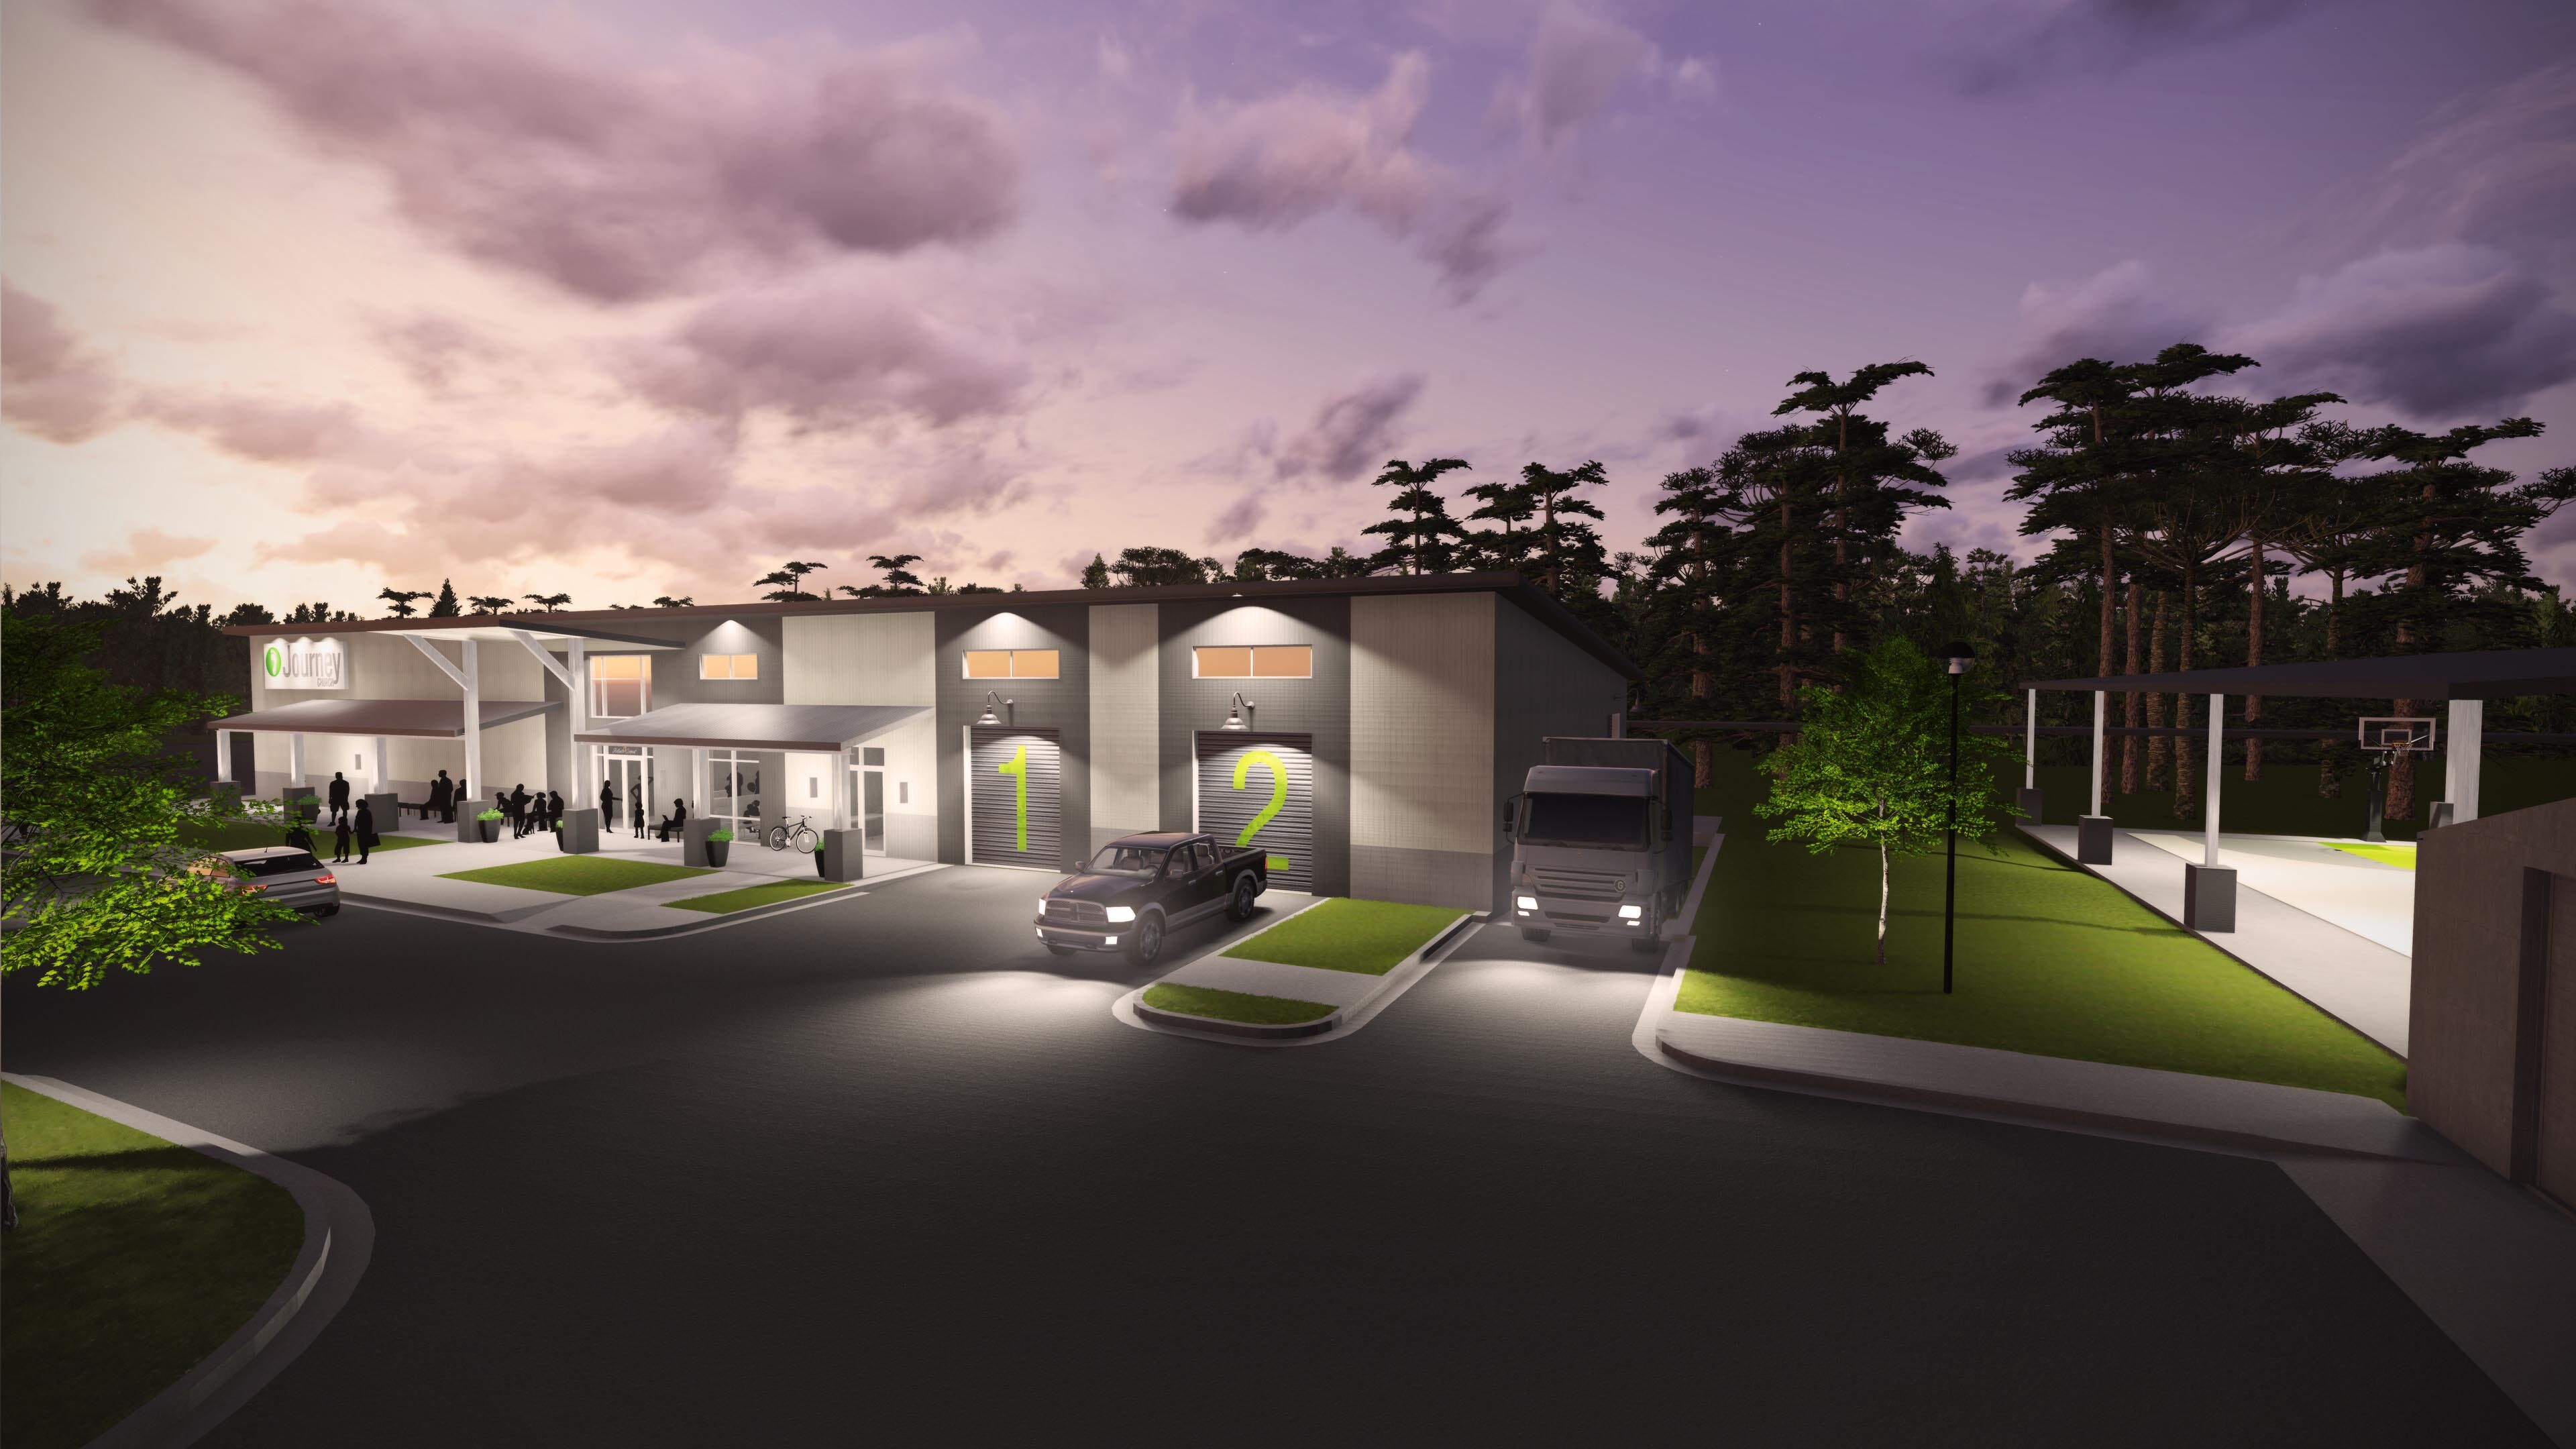 The Journey Church Ministry Building - Exterior Rendering